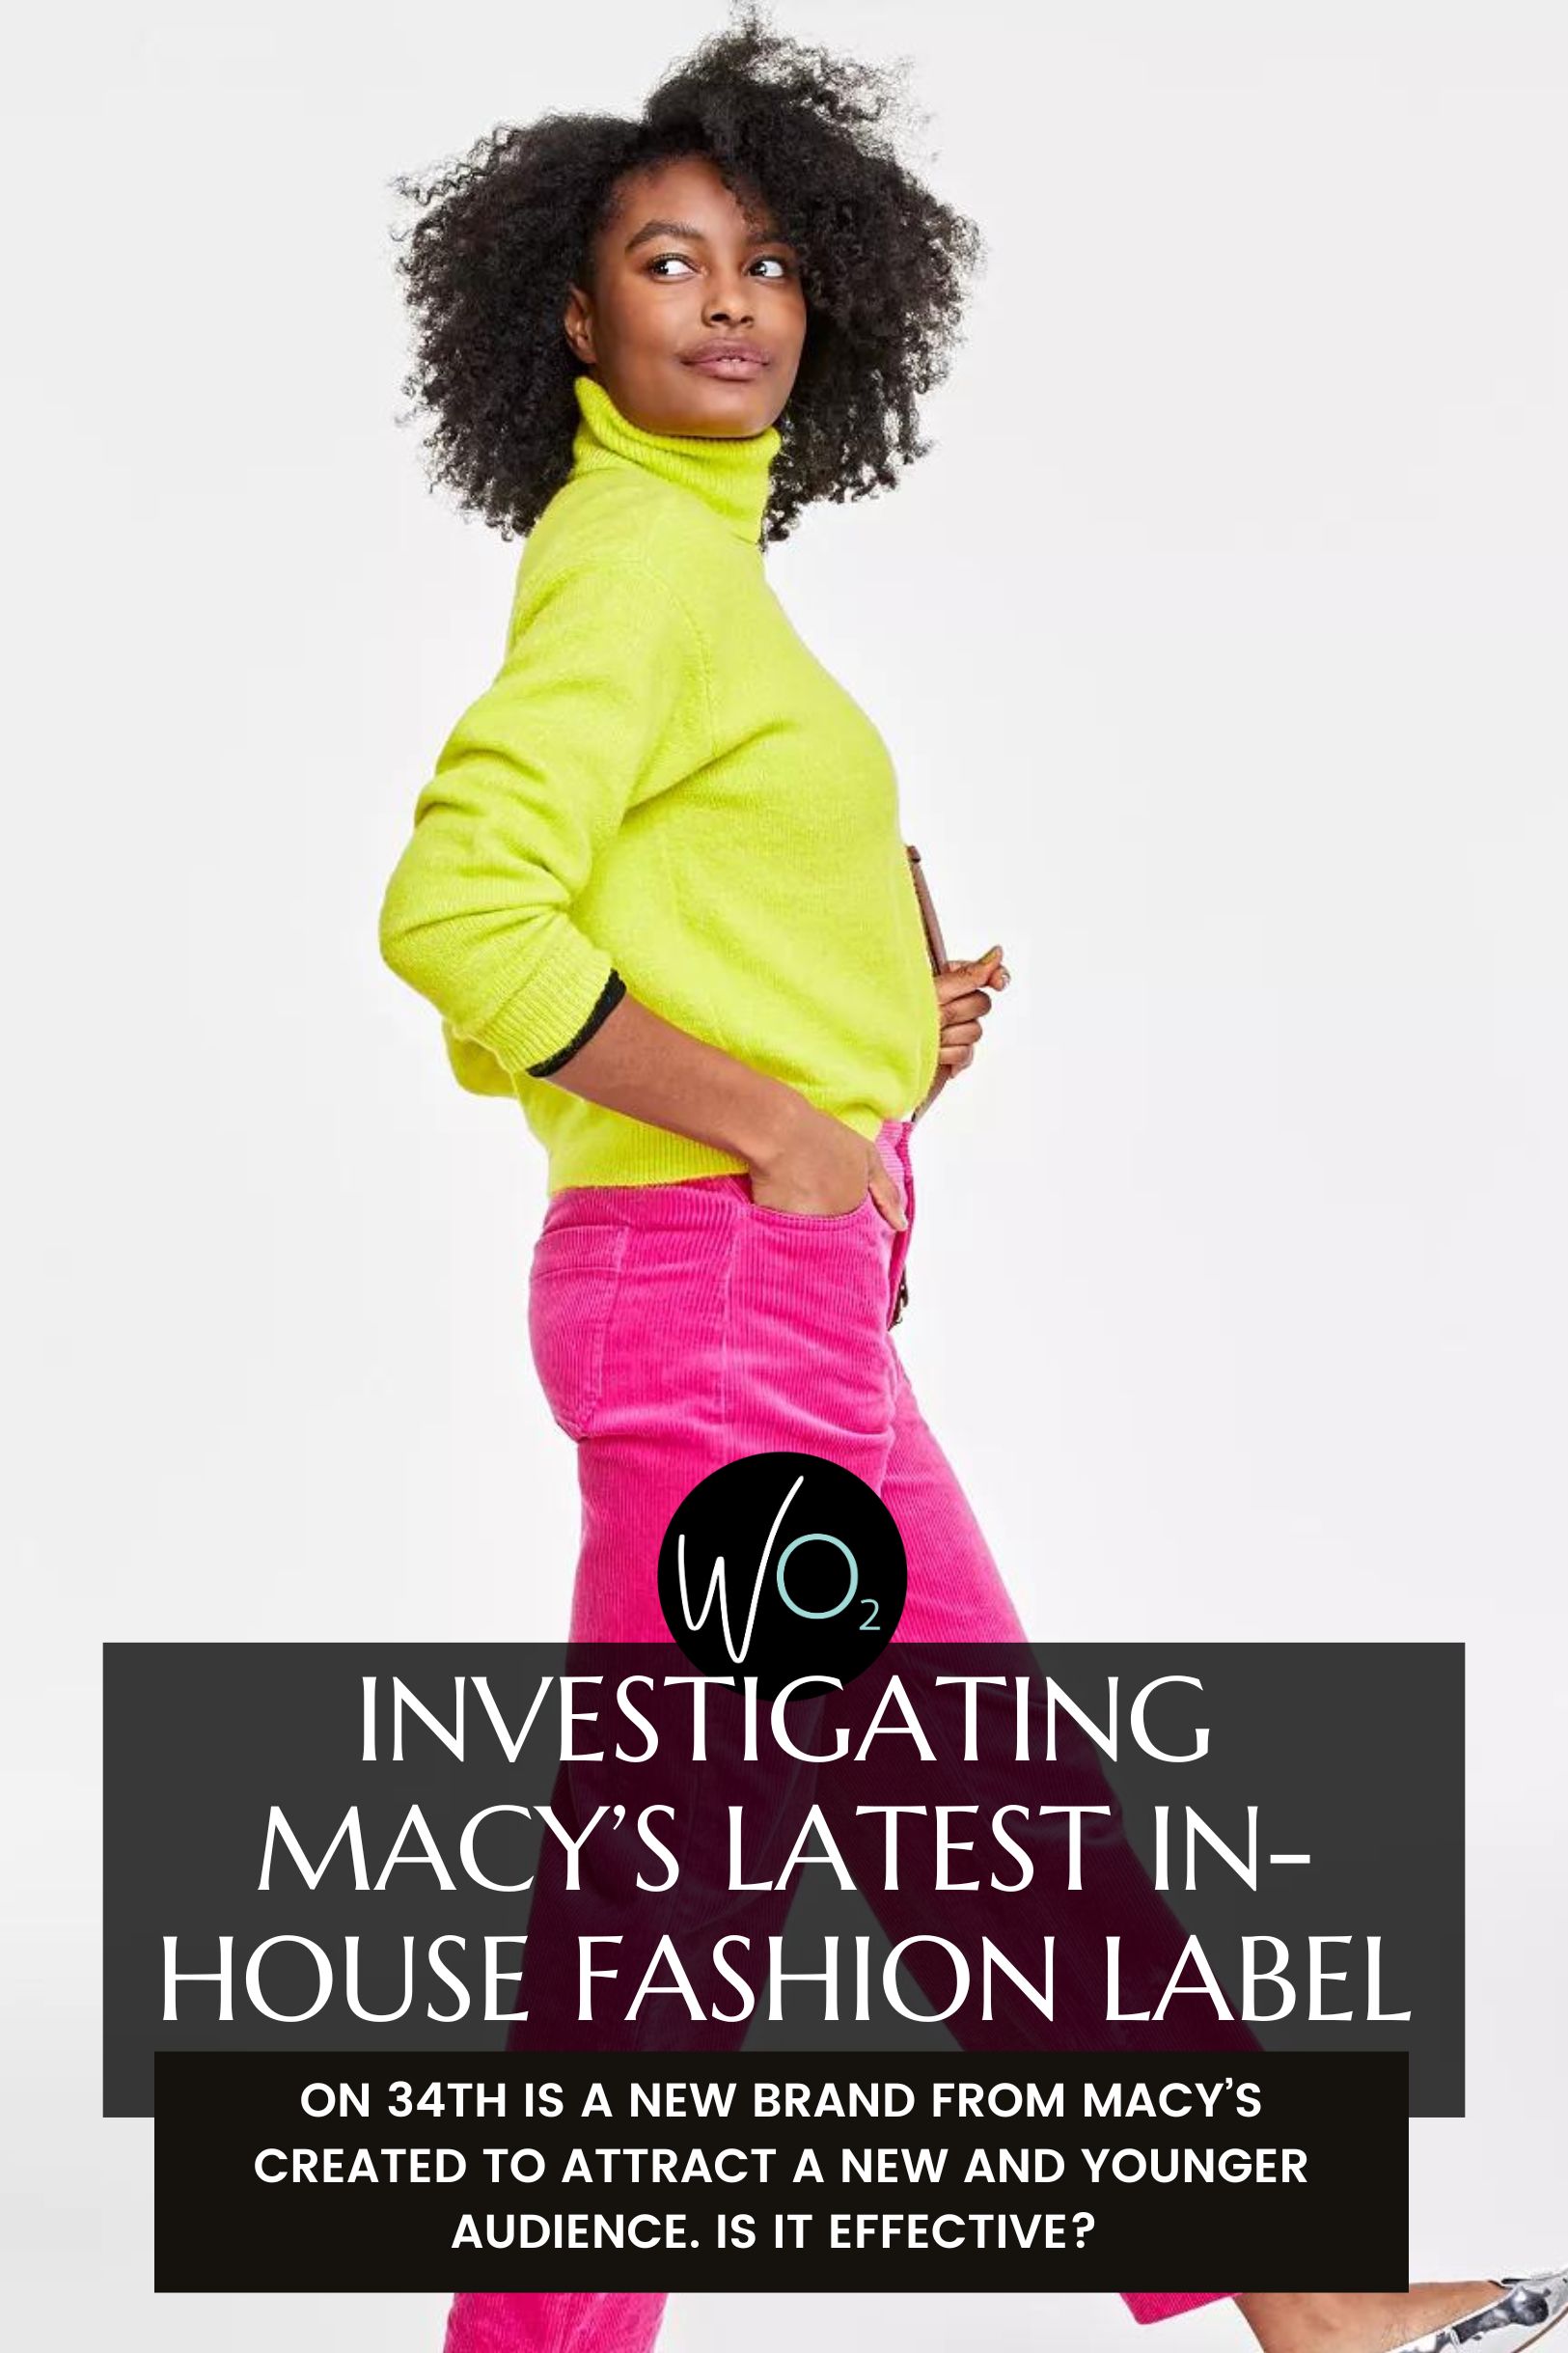 What’s up with Macy’s On 34th Fashion Brand?